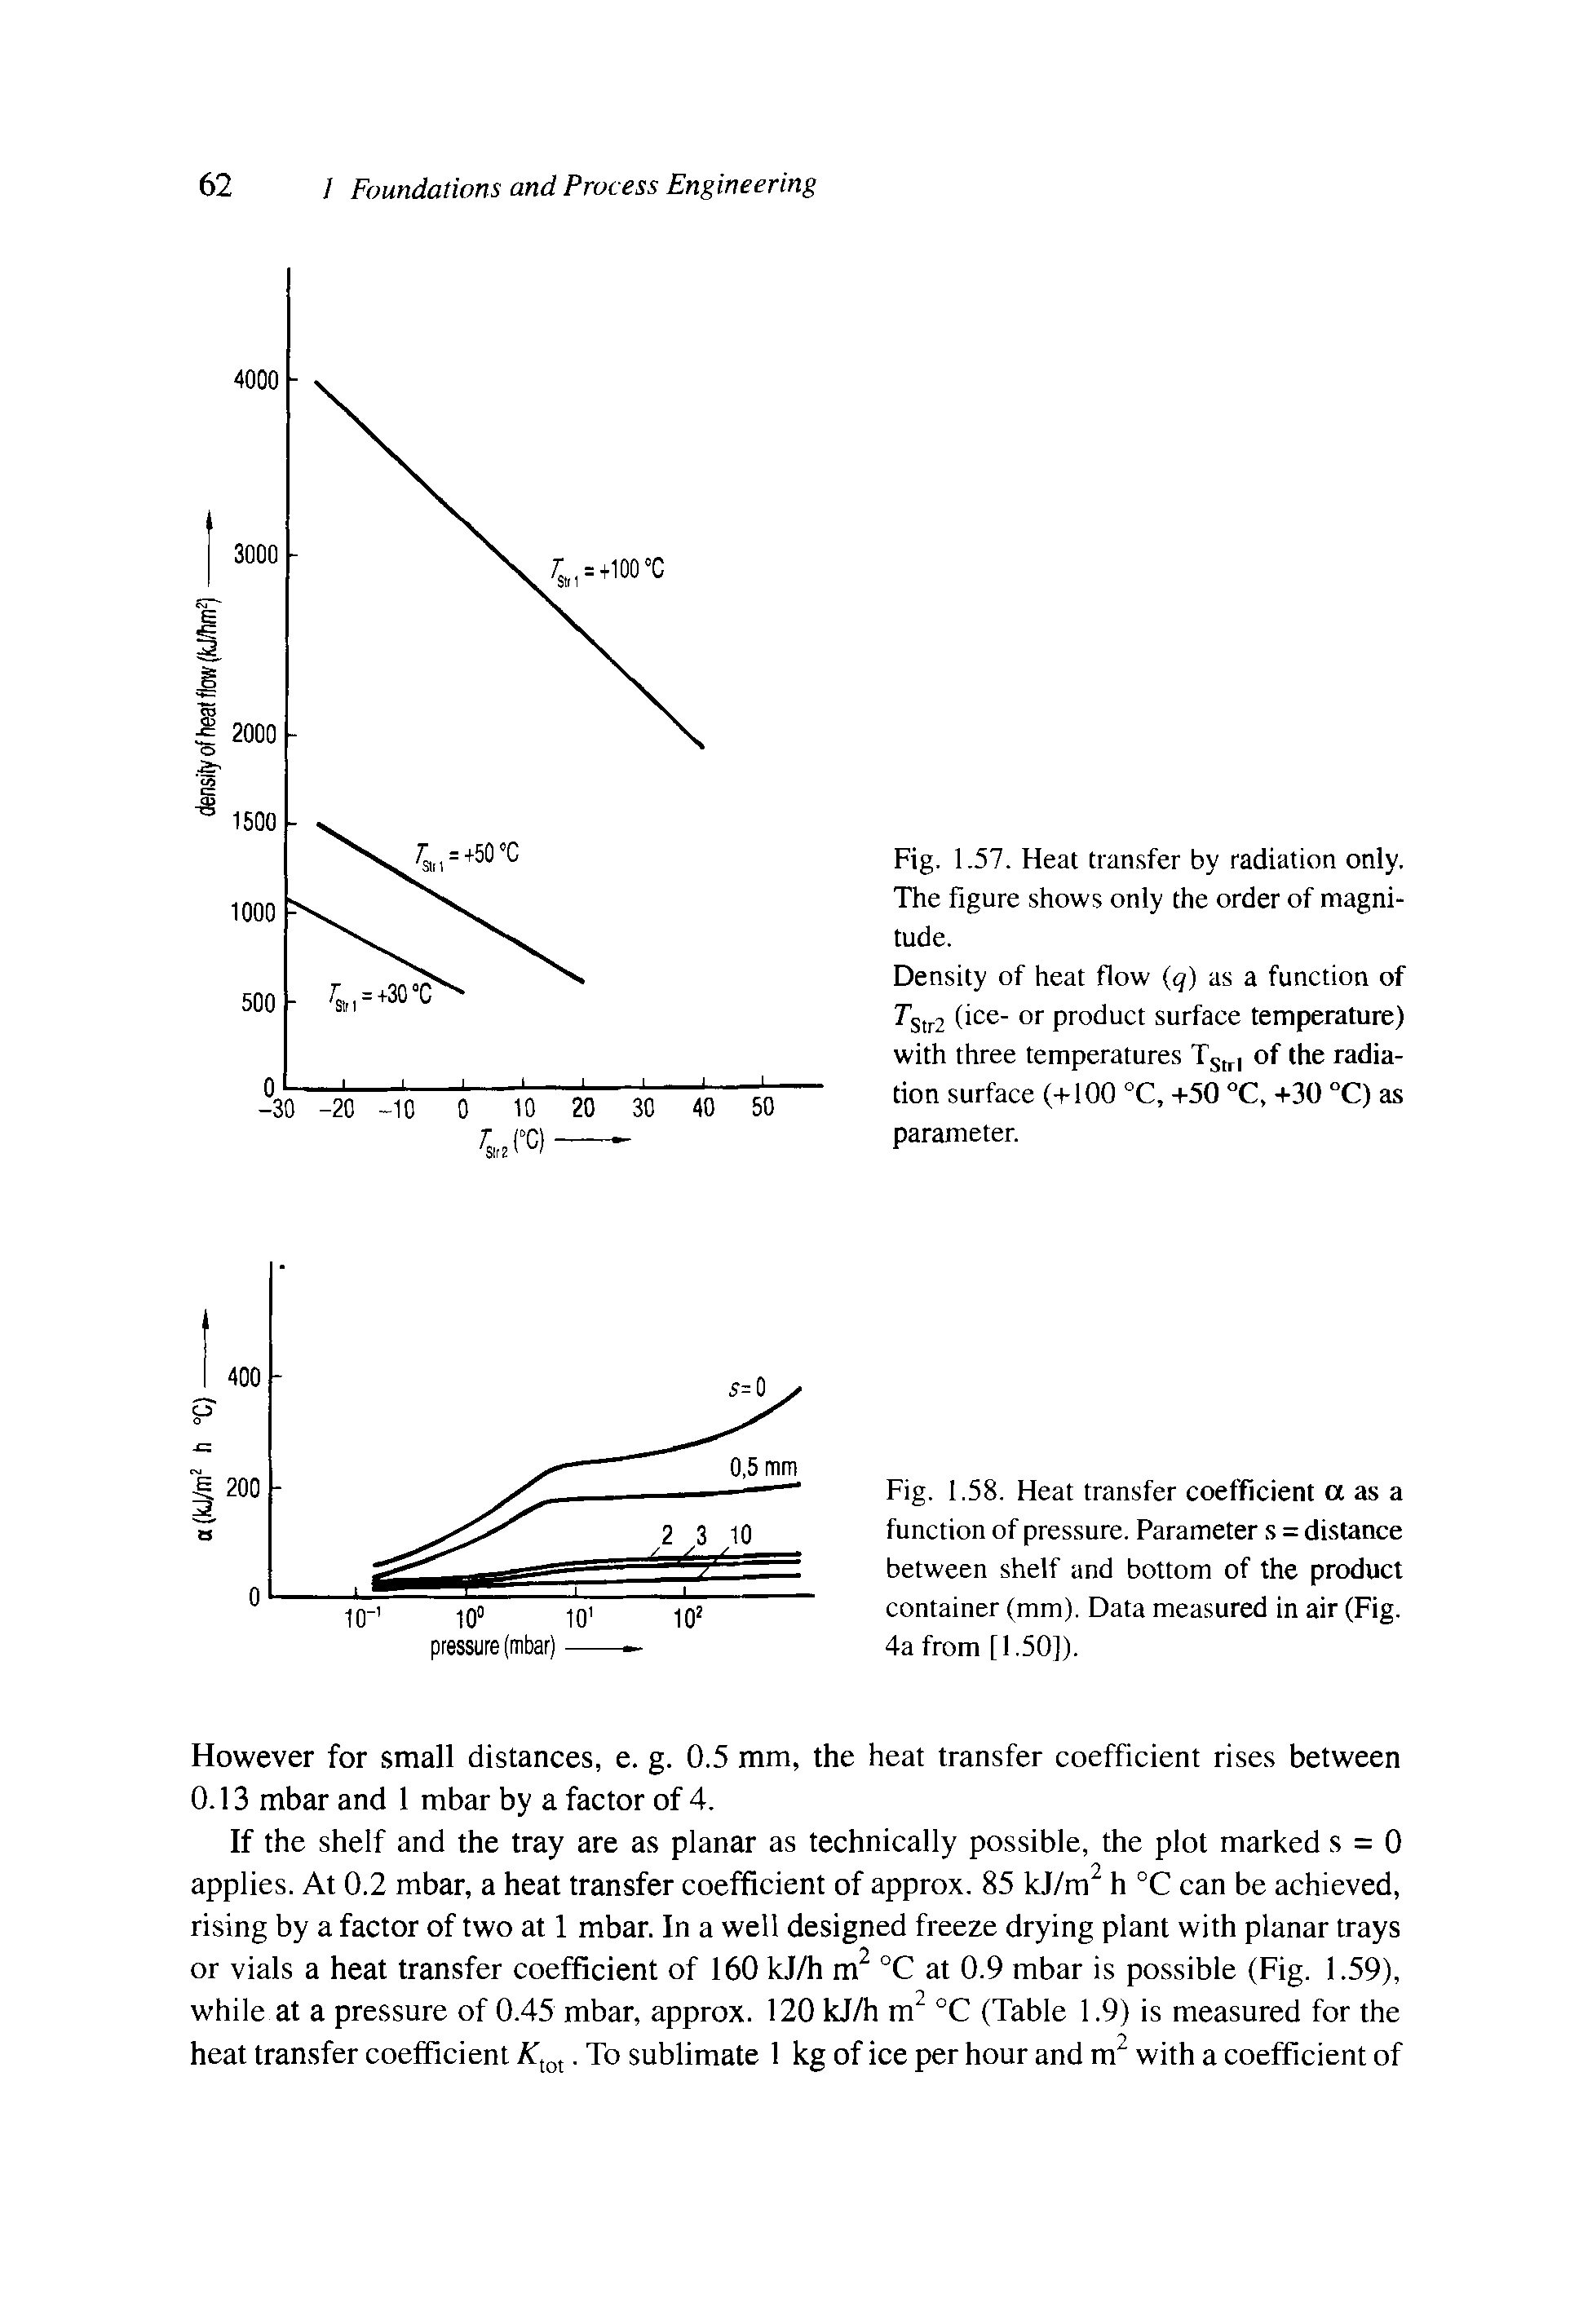 Fig. 1.58. Heat transfer coefficient a as a function of pressure. Parameter s = distance between shelf and bottom of the product container (mm). Data measured in air (Fig. 4a from [1.50]).